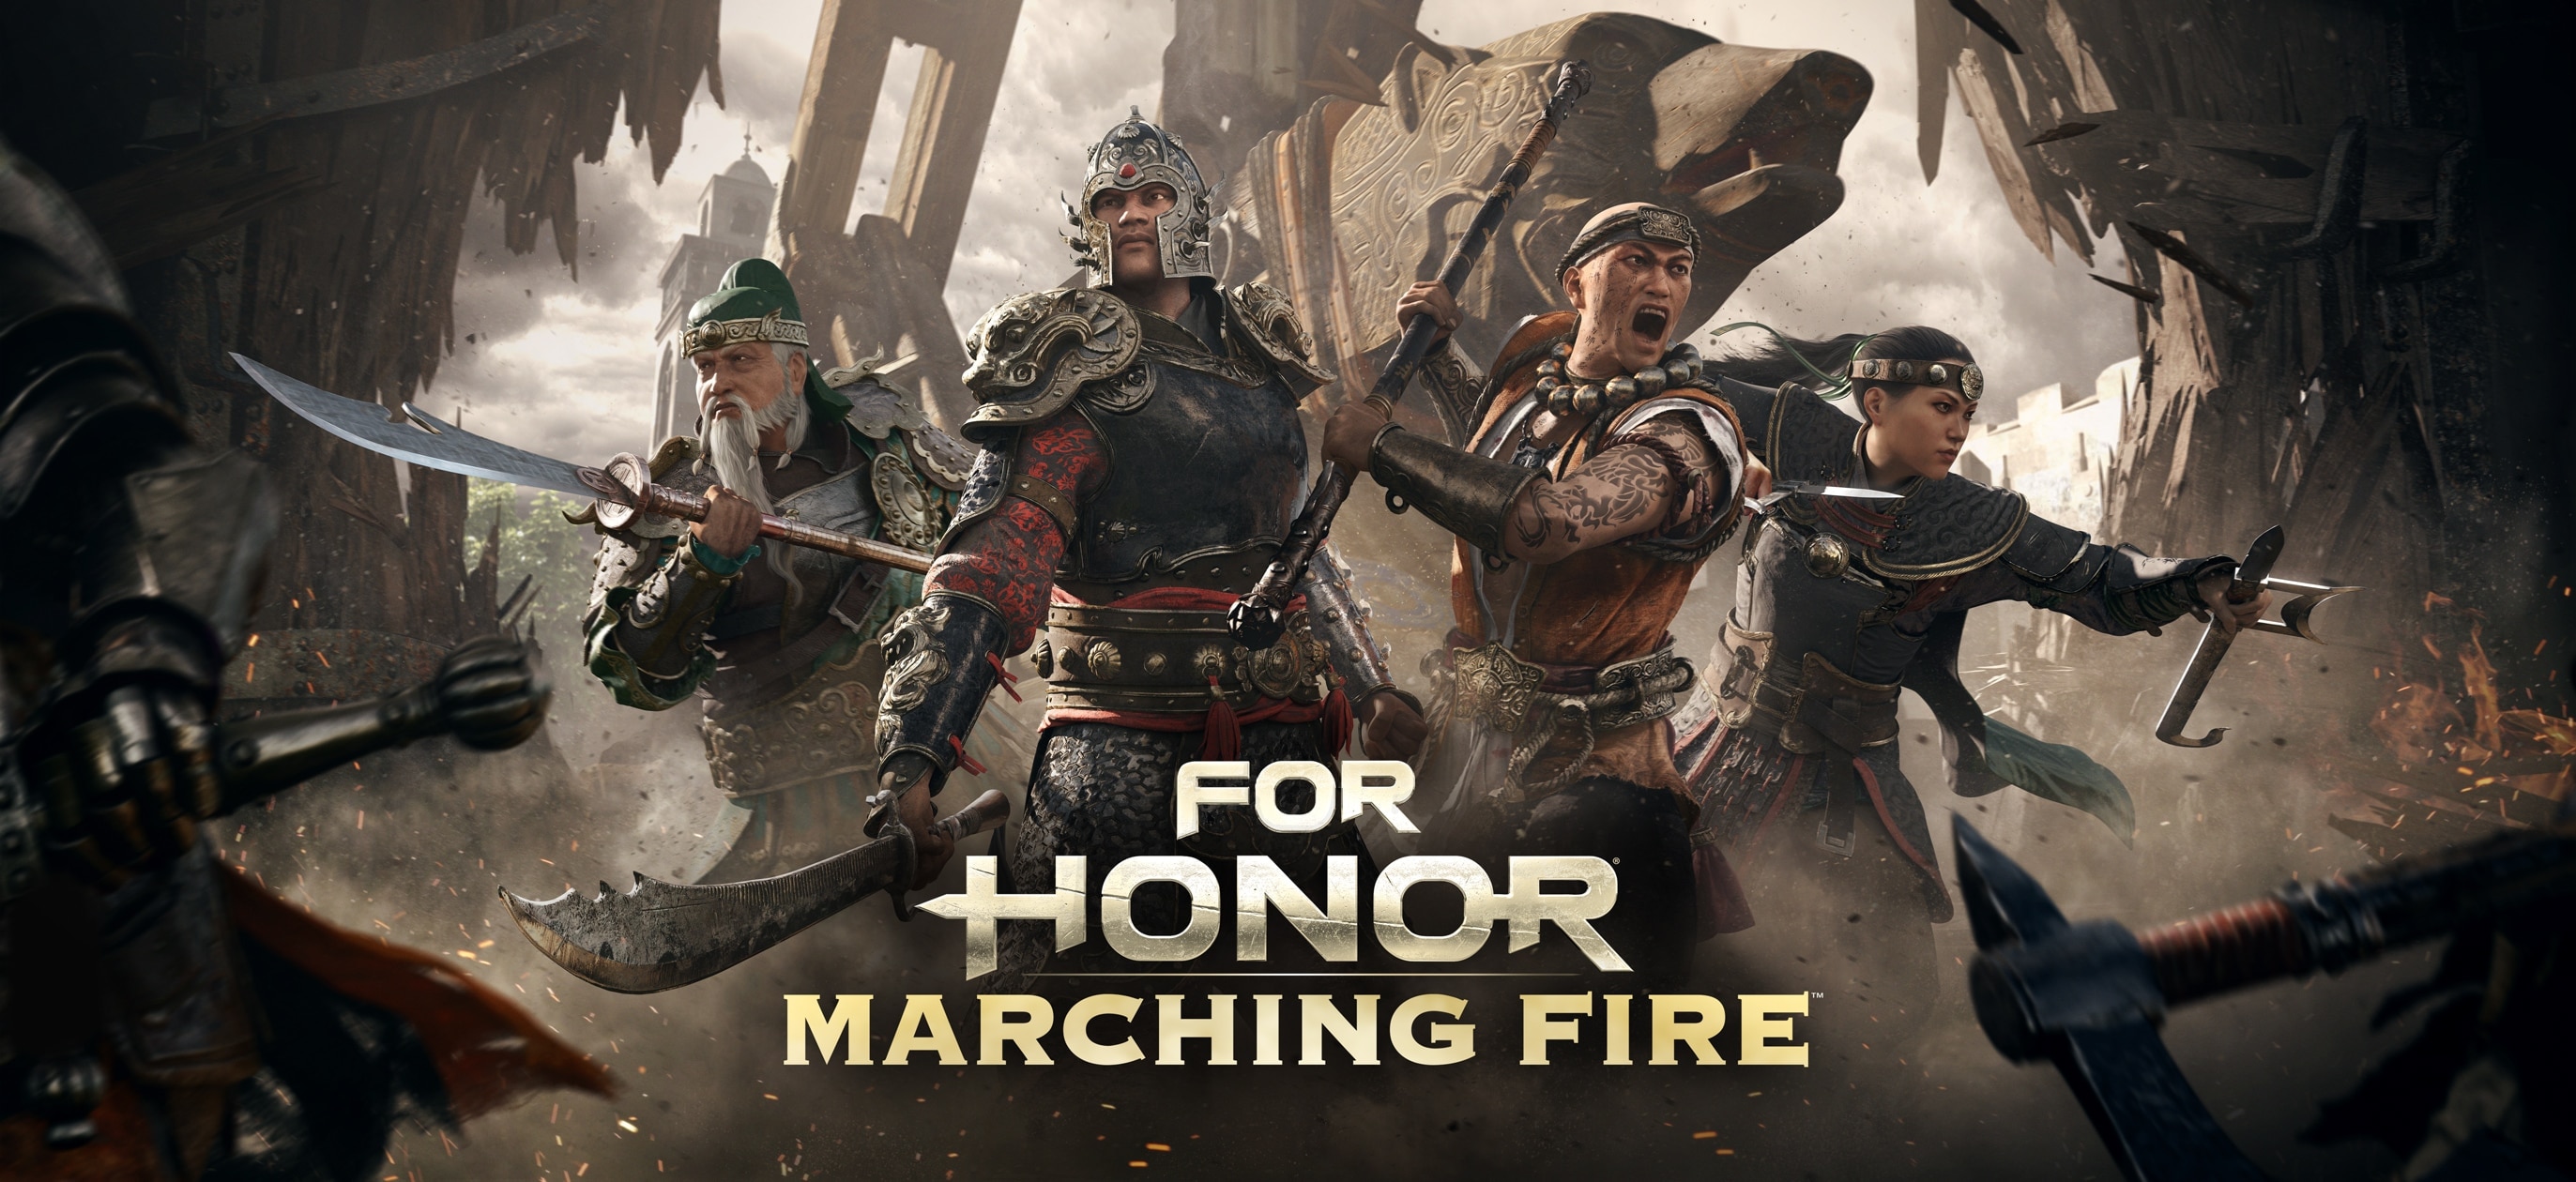 For Honor Maching Fire Wallpapers